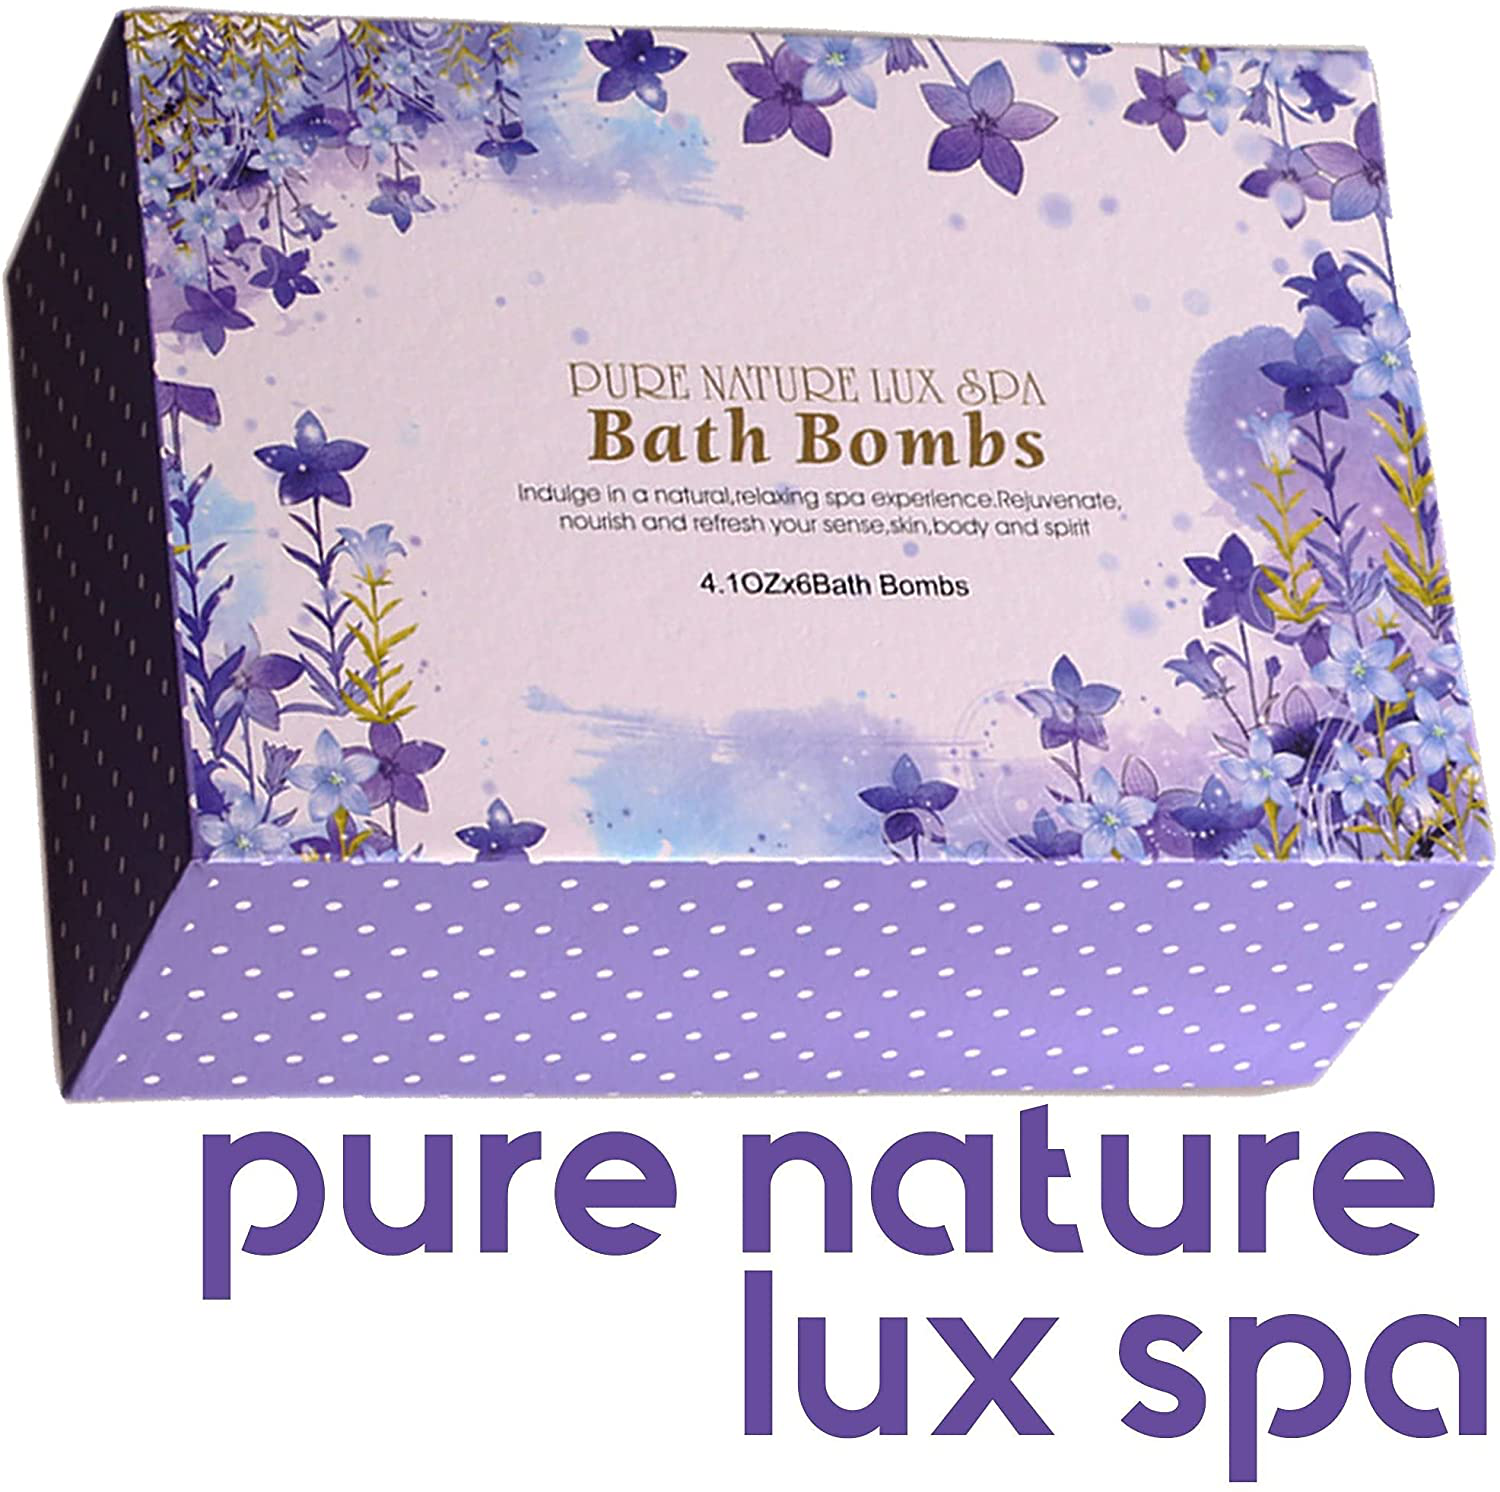 LuxSpa Bath Bombs Gift Set - The Best Ultra Bubble Fizzies with Natural Dead Sea Salt Cocoa and Shea Essential Oils, 6 x 4.1 oz, The Best Birthday Gift Idea for Her/Him, Wife, Girlfriend, Women